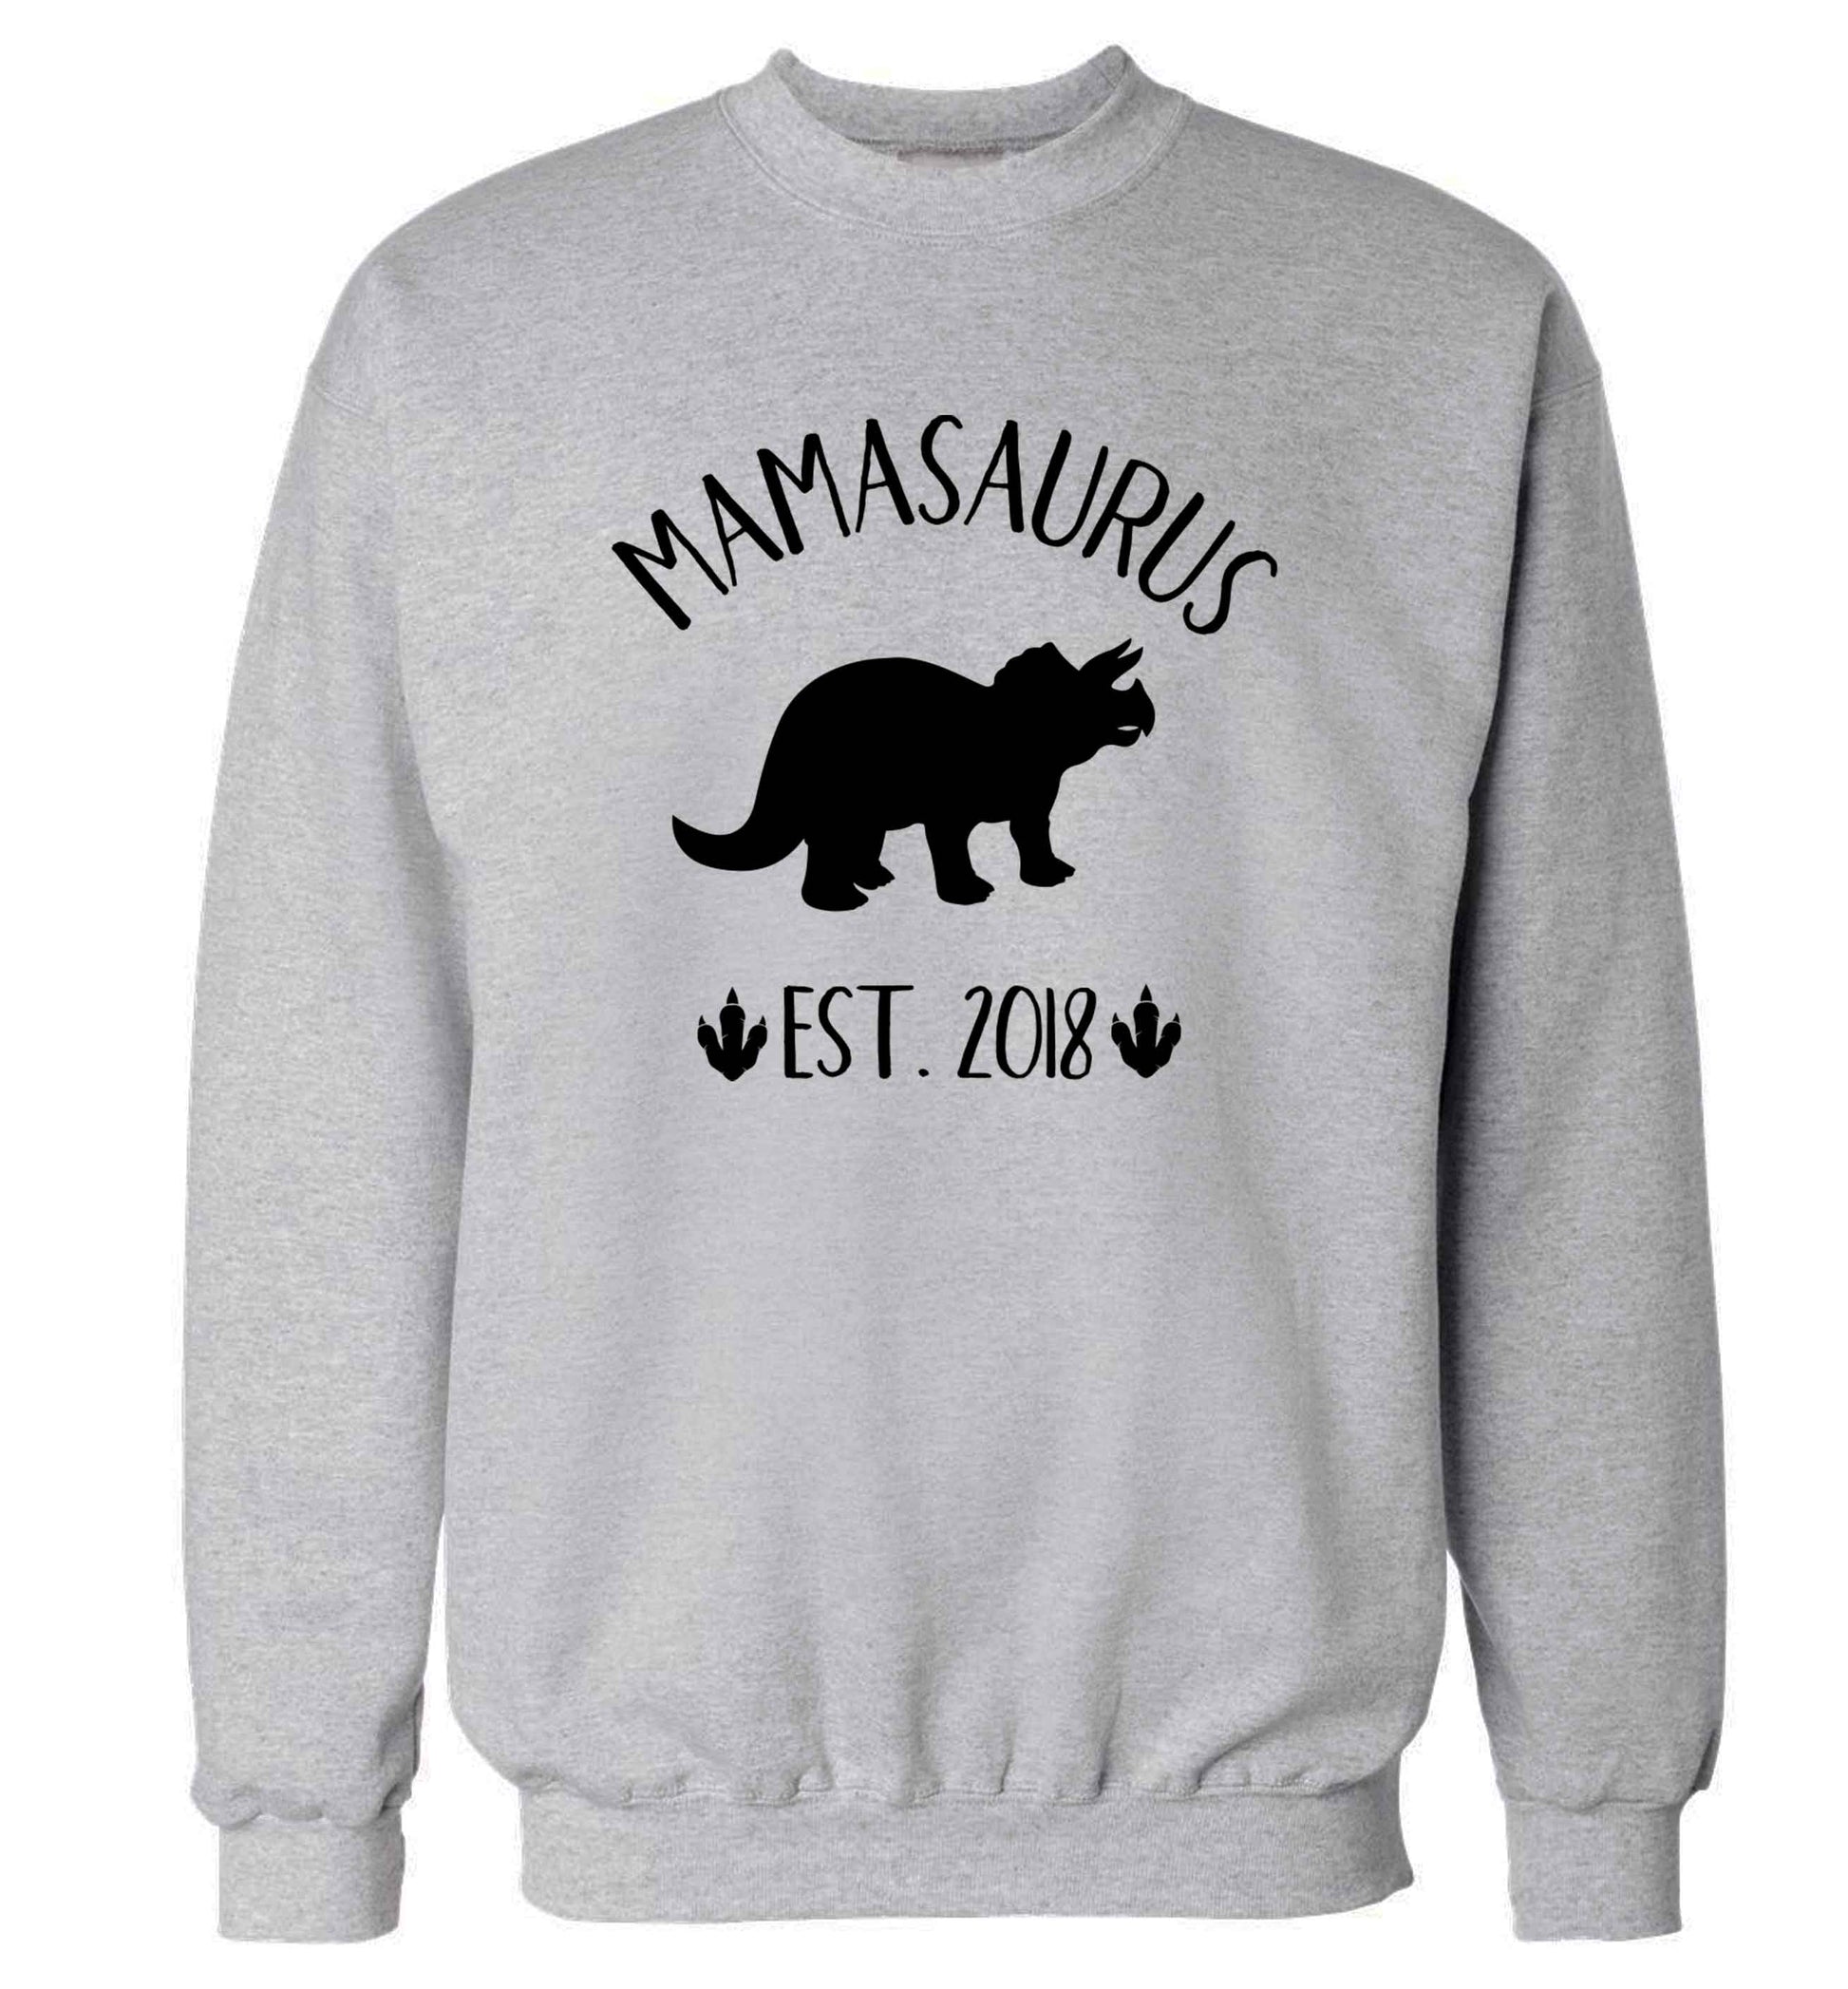 Personalised mamasaurus date adult's unisex grey sweater 2XL